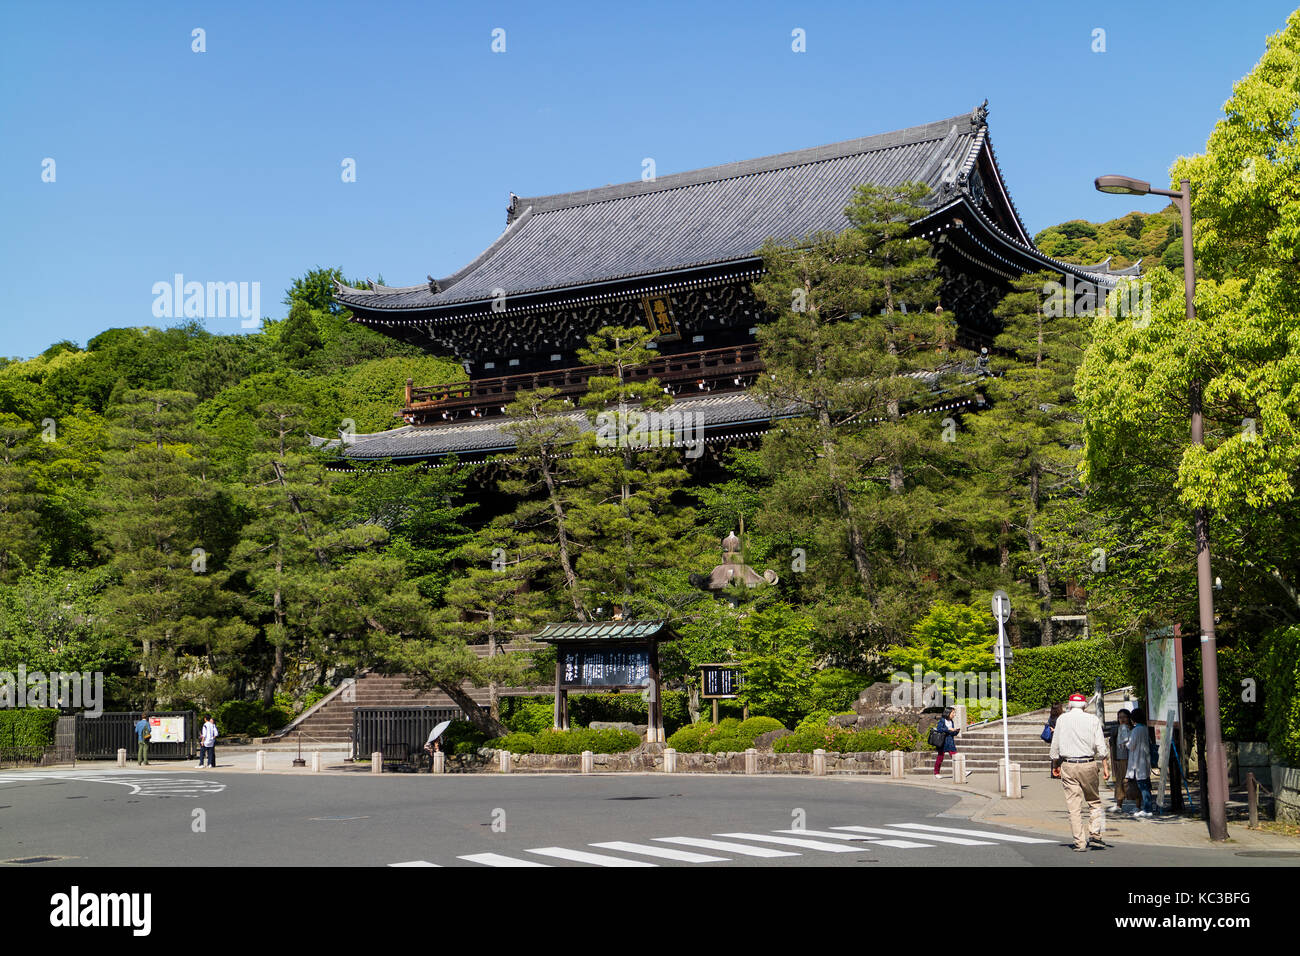 Kyoto, Japan - May 18, 2017: Massive Sanmon Gate, the entrance to the Buddhist Chion in temple Stock Photo